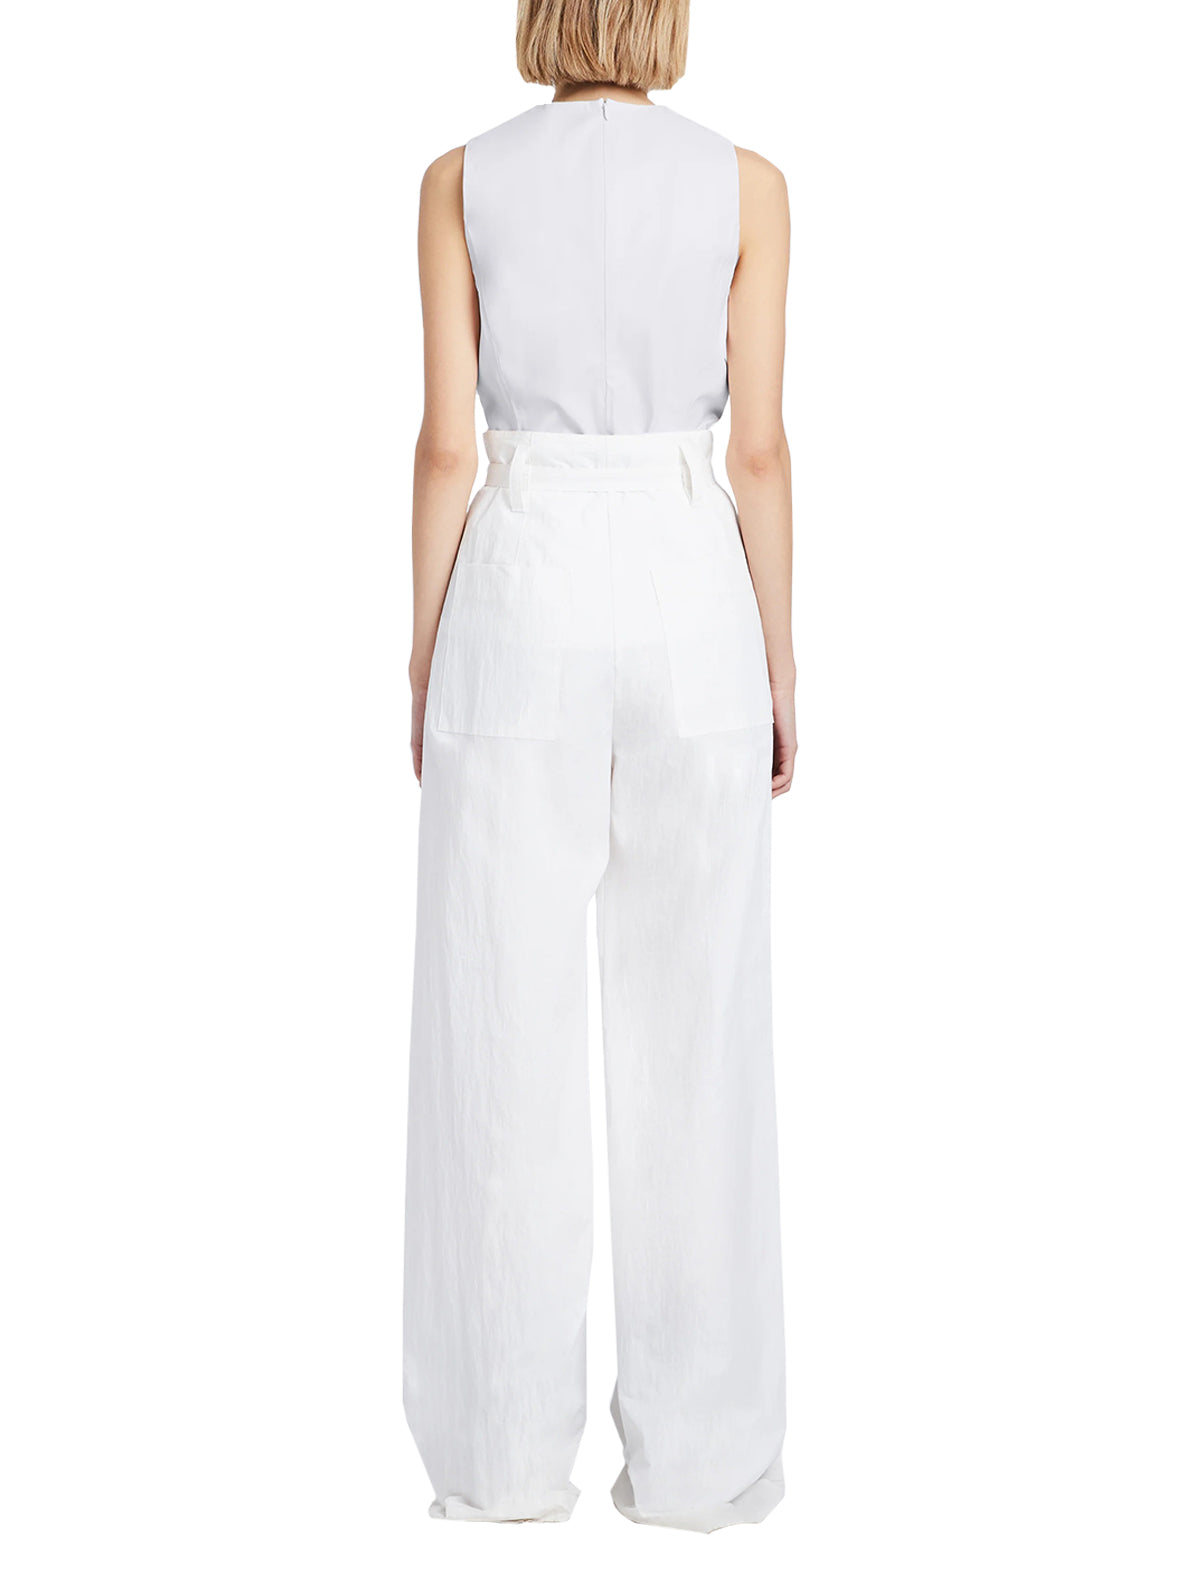 PROENZA SCHOULER WHITE LABEL Faux Leather Drawstring Top in Off White